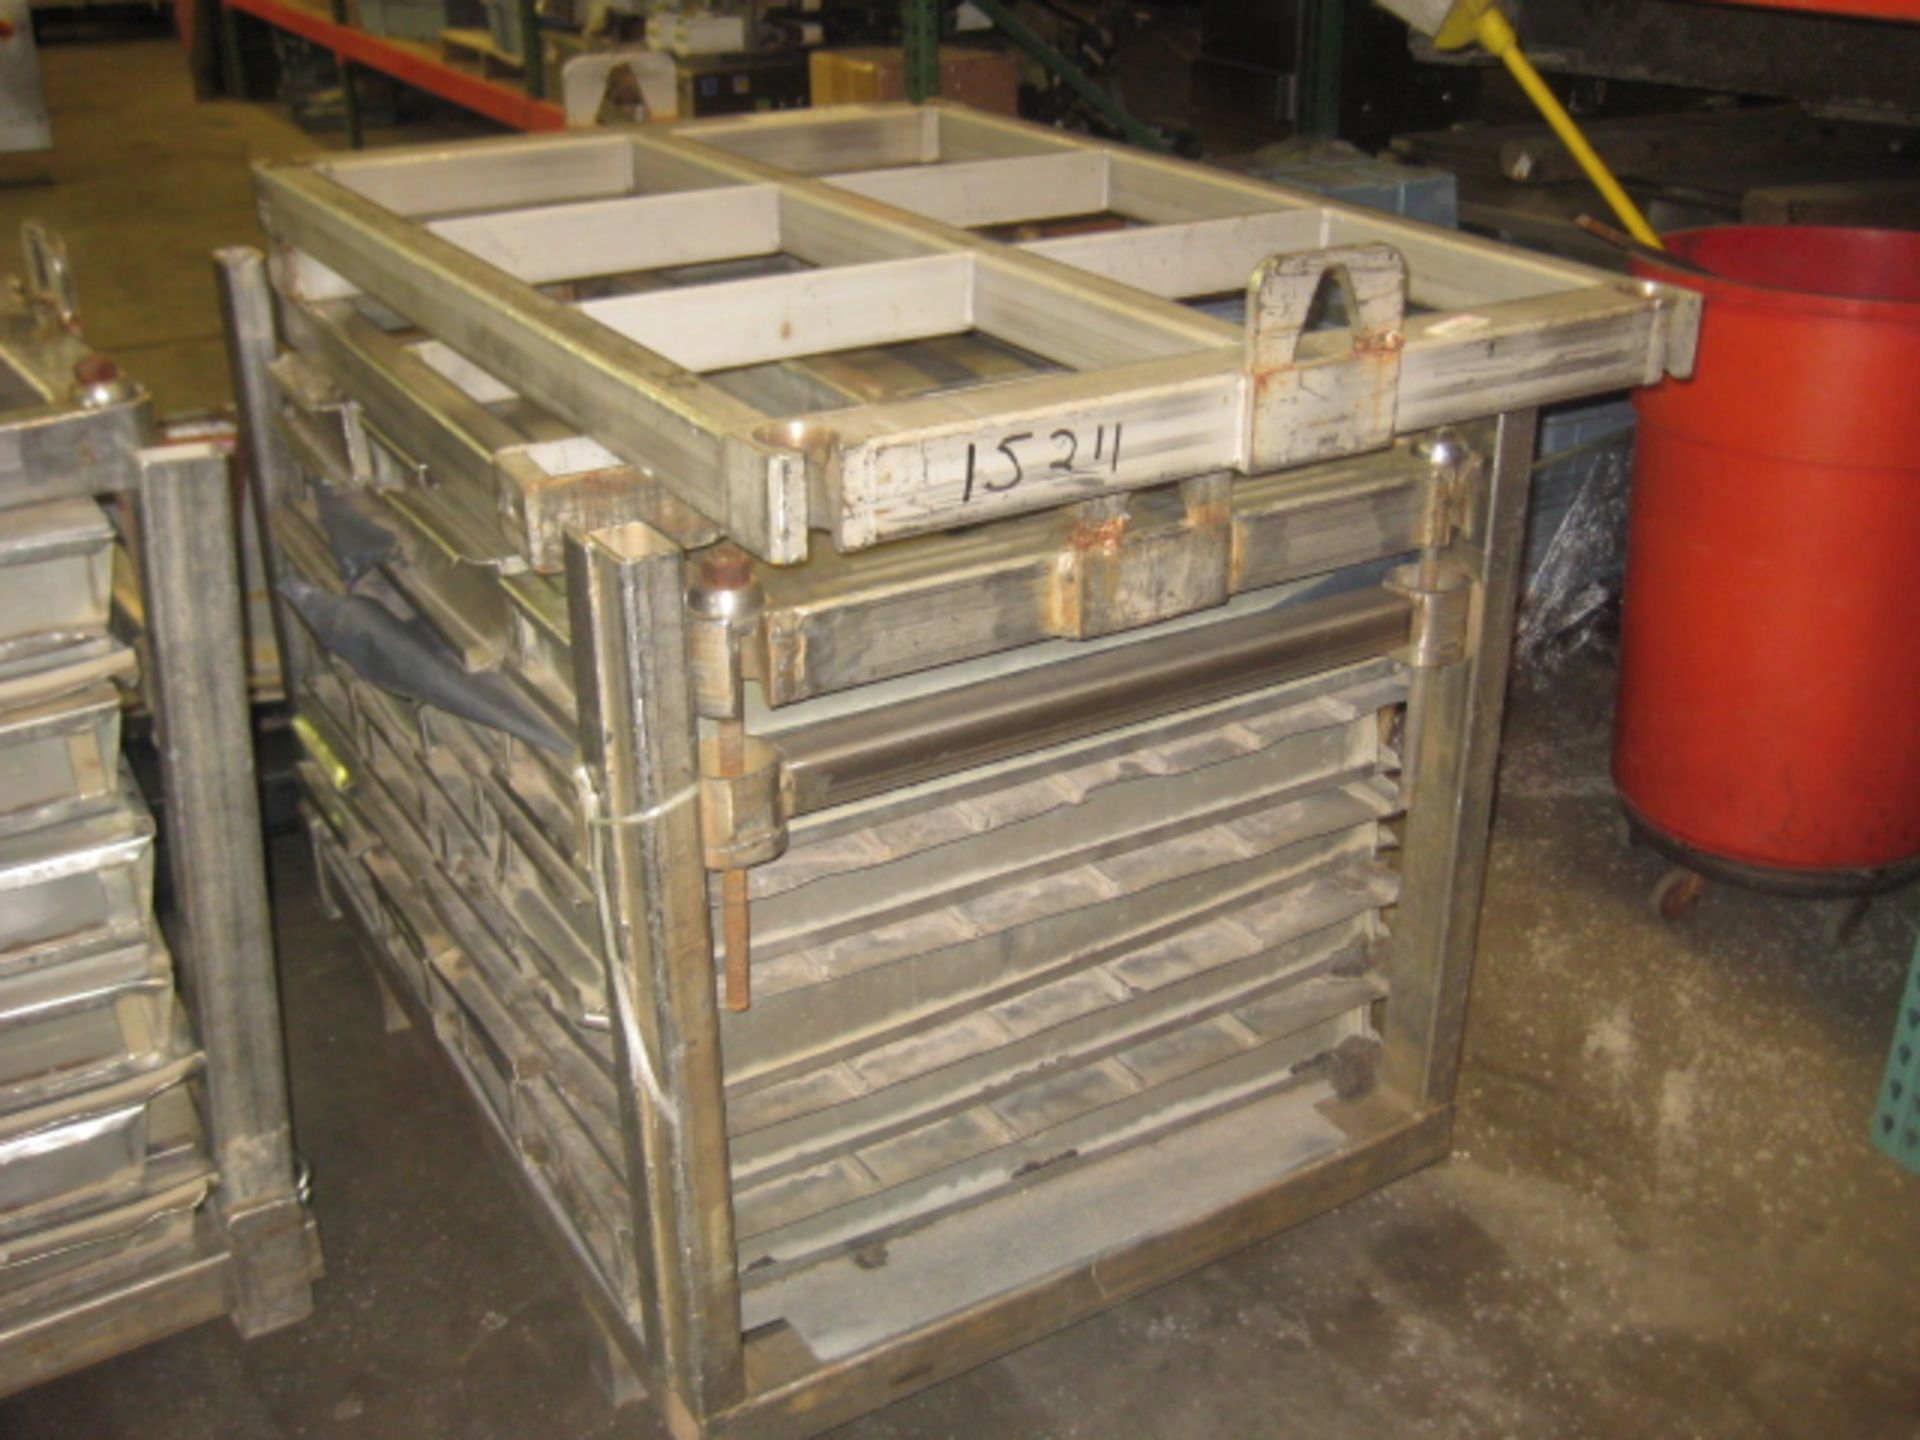 Stainless Steel Product mold tower 24 trays,9"W 3.75"dp 32.5"L mold in each tray.